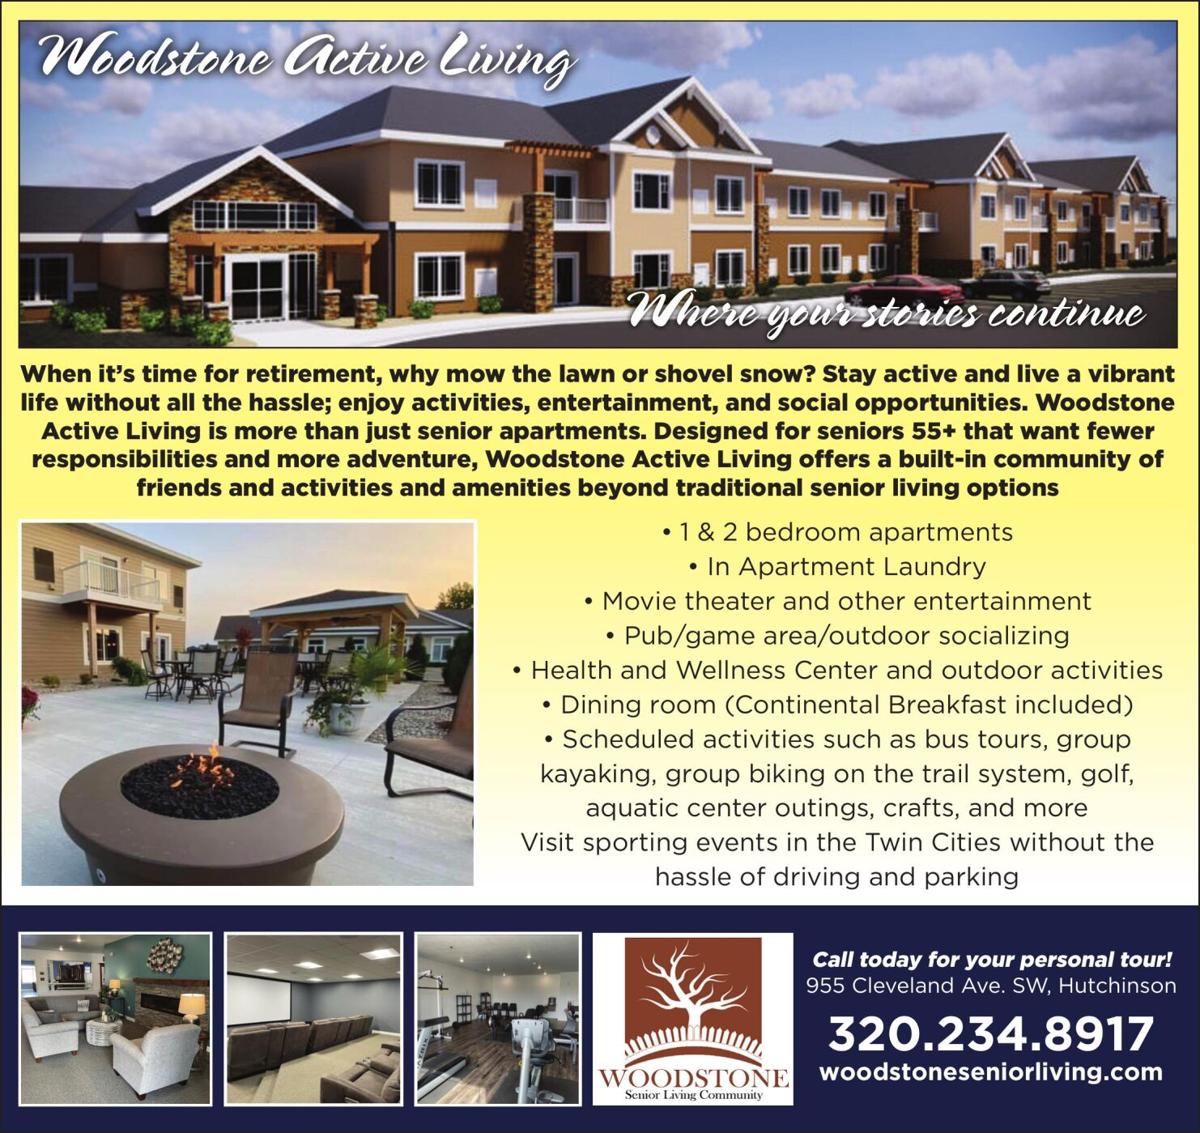 Woodstone Active Living Where your